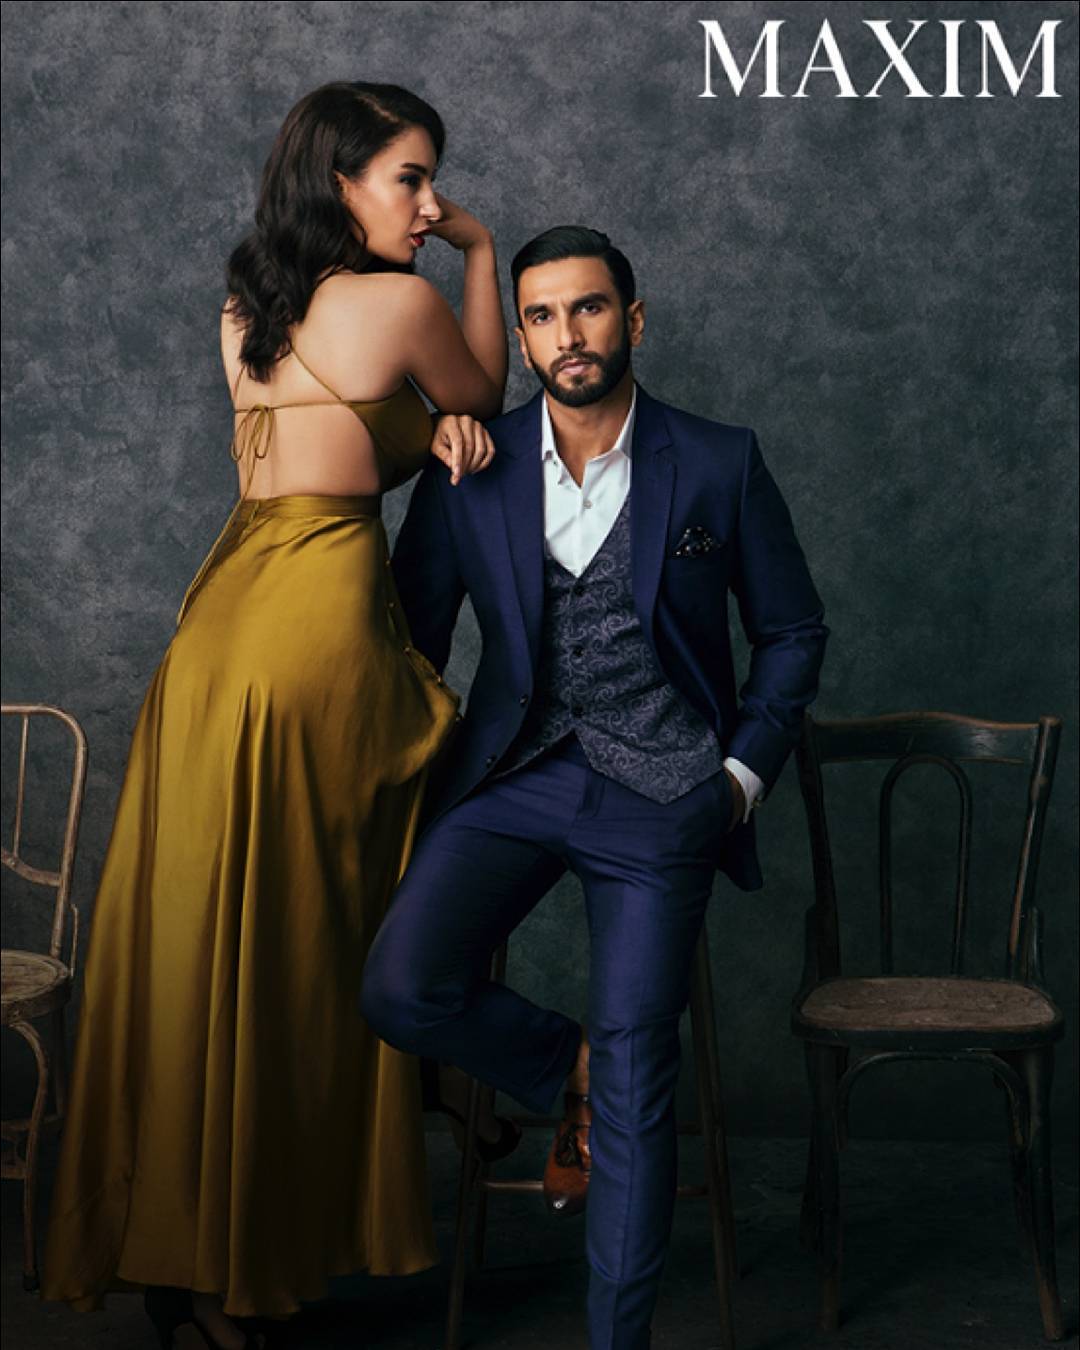 Ranveer Singh shows us how to look effortlessly dapper this season. He looks stunning in the 3-piece Royal Blue suit from our latest AW’17 collection in a photoshoot for Maxim.

#TheArvindStores #RanveerSingh #RanveerForMaxim #Maxim #MaximIndia #Arvind #Style #Ranveer #Stylish #StyleStatement #Fashion #FashionForMen #MensFashion